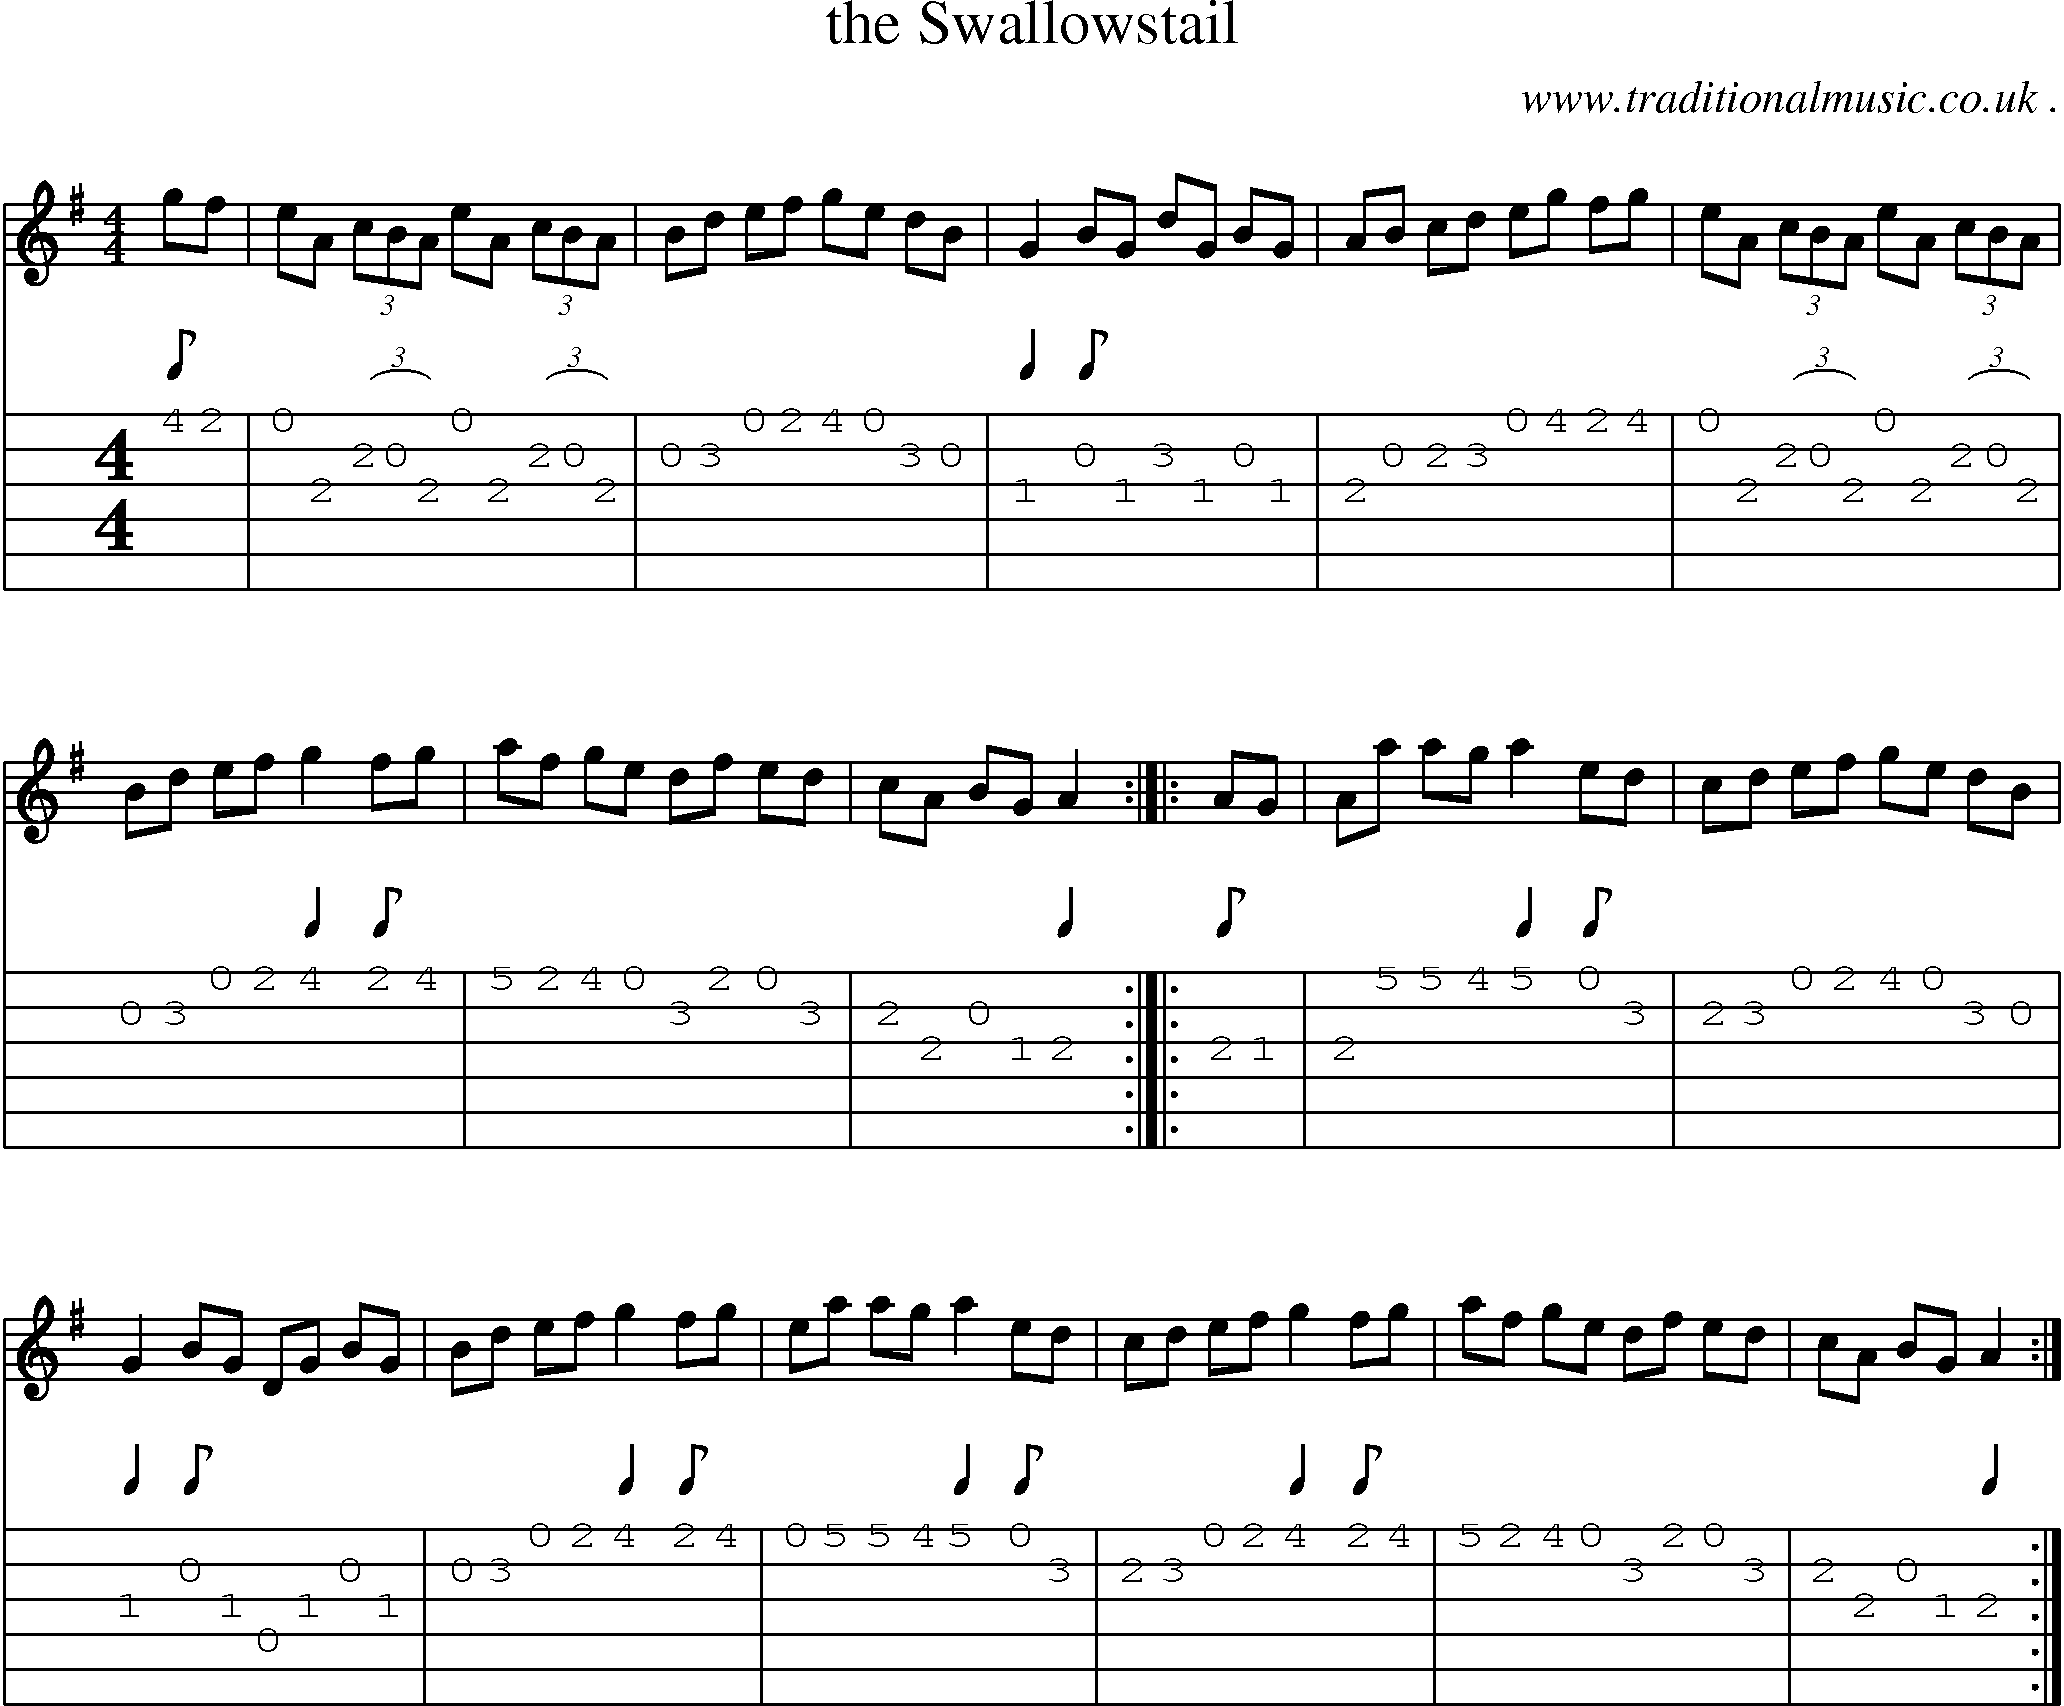 Sheet-Music and Guitar Tabs for The Swallowstail